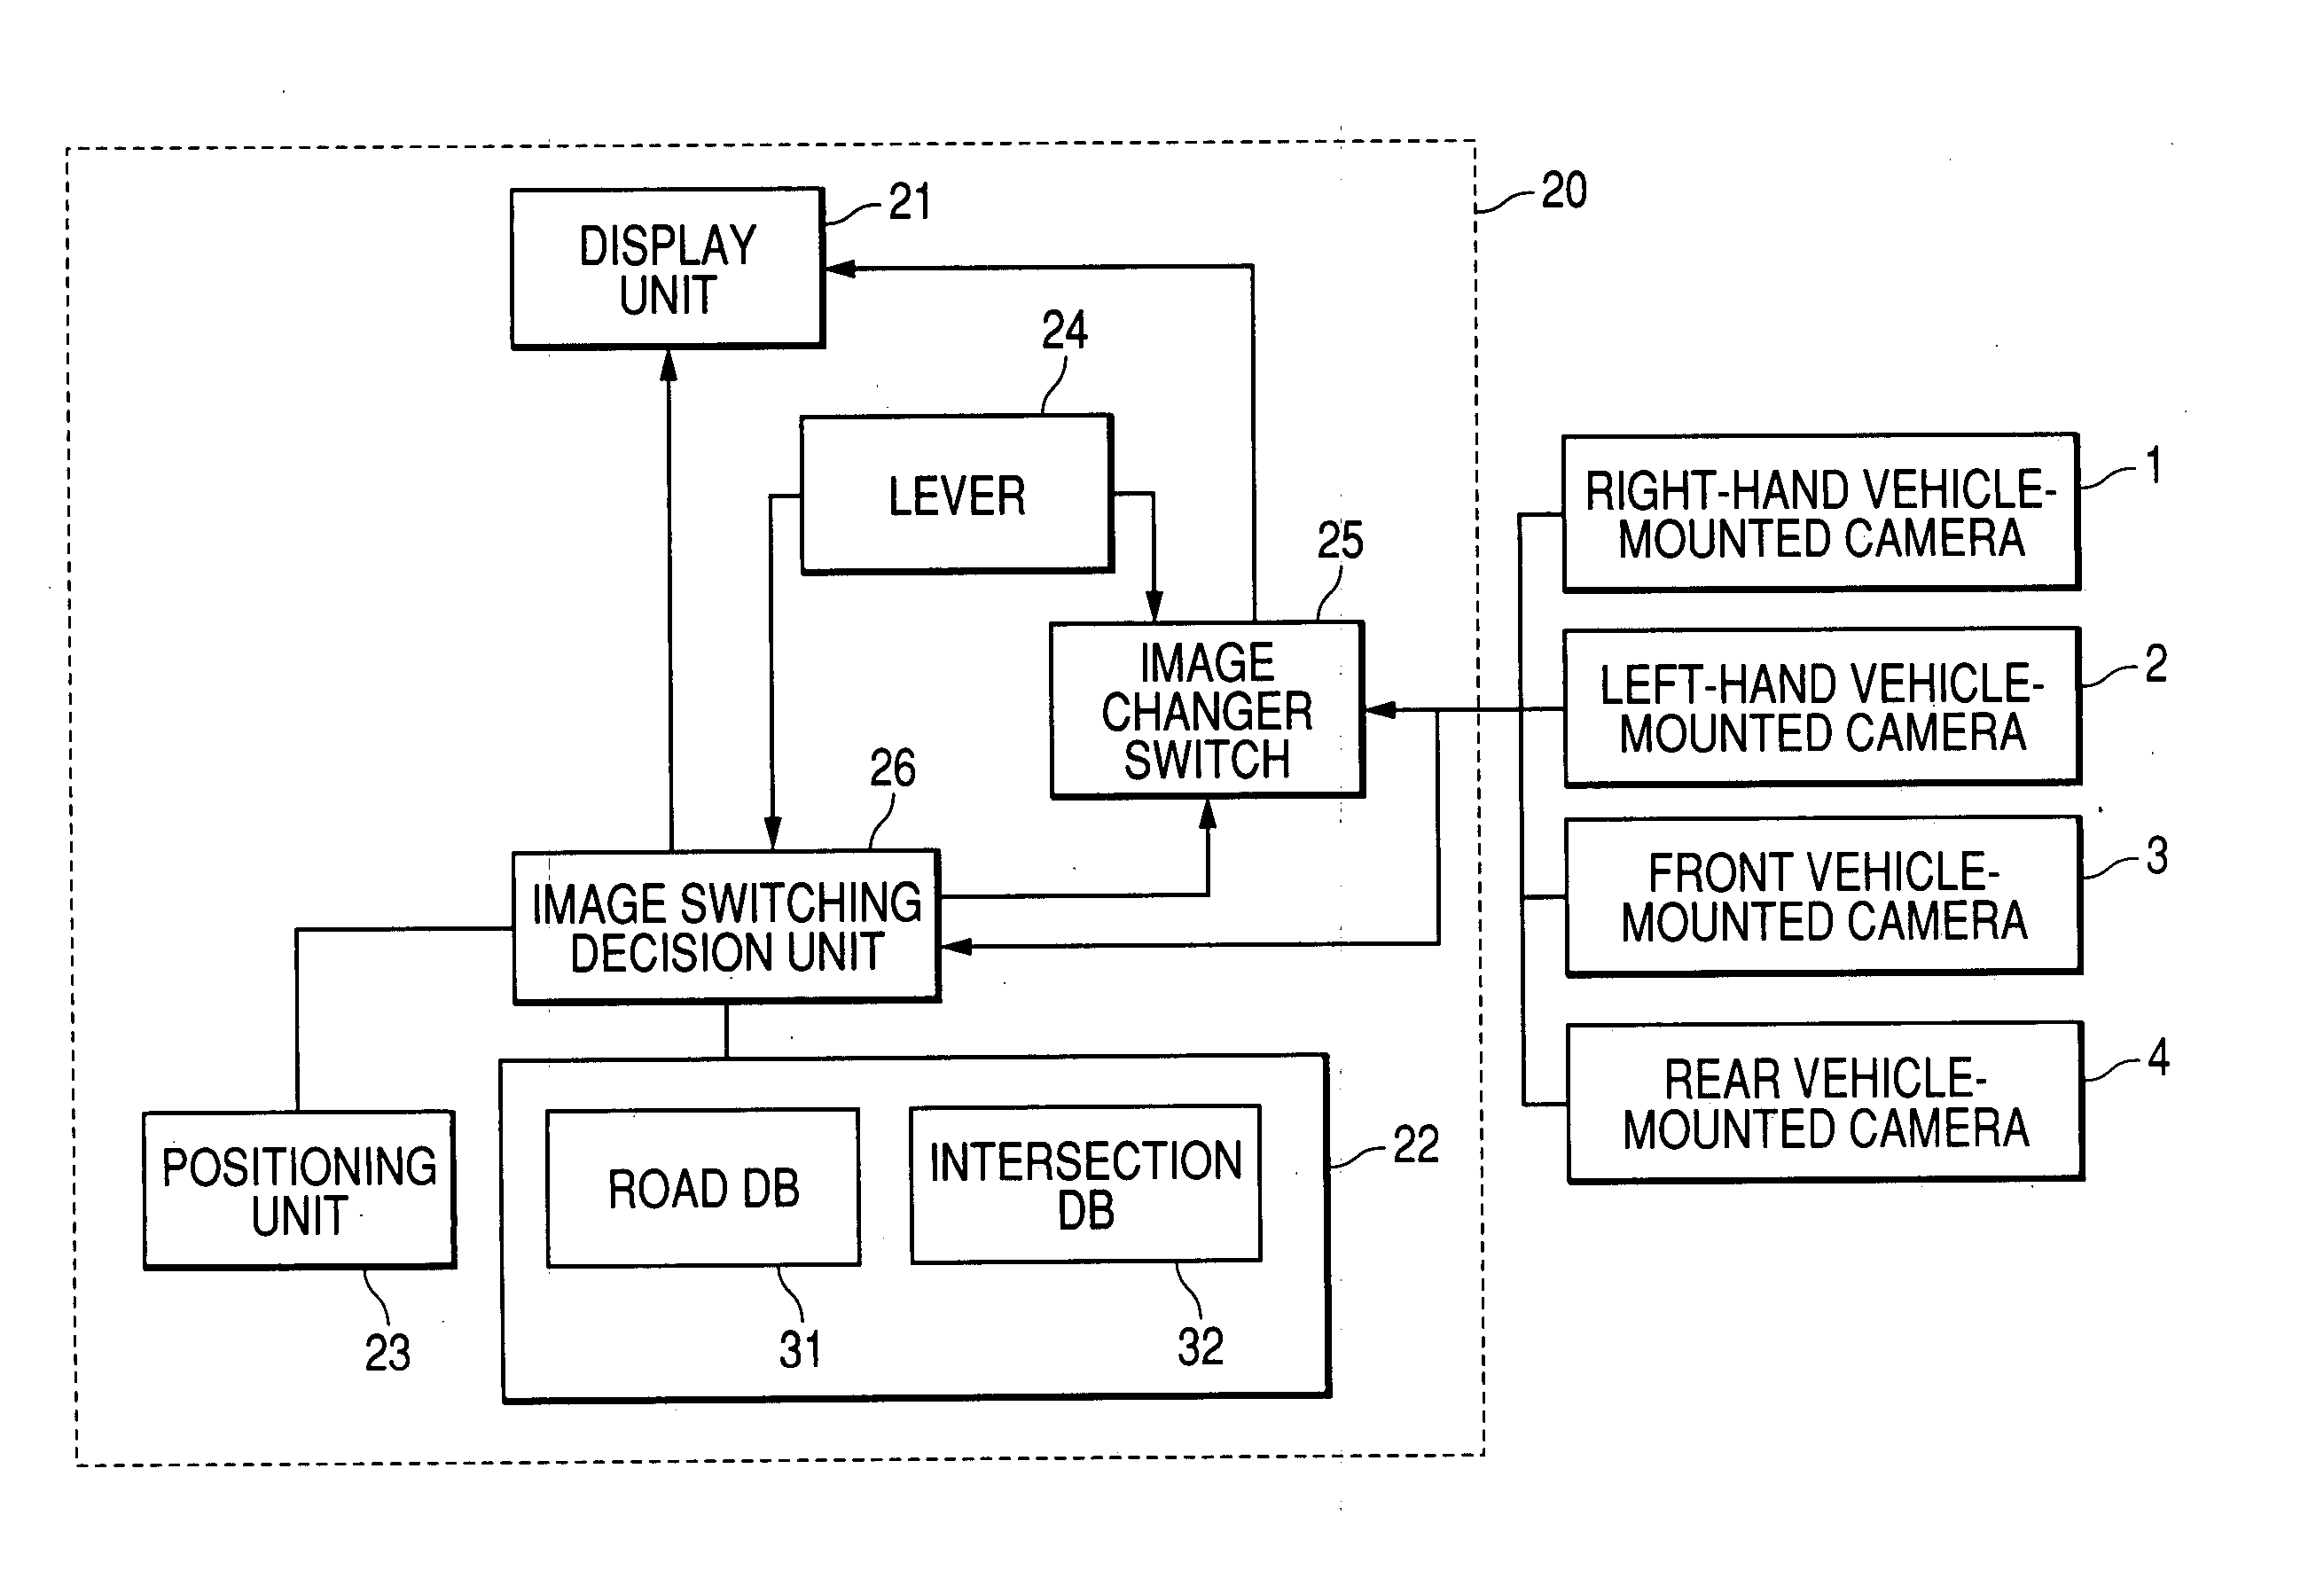 Vehicle periphery display control system